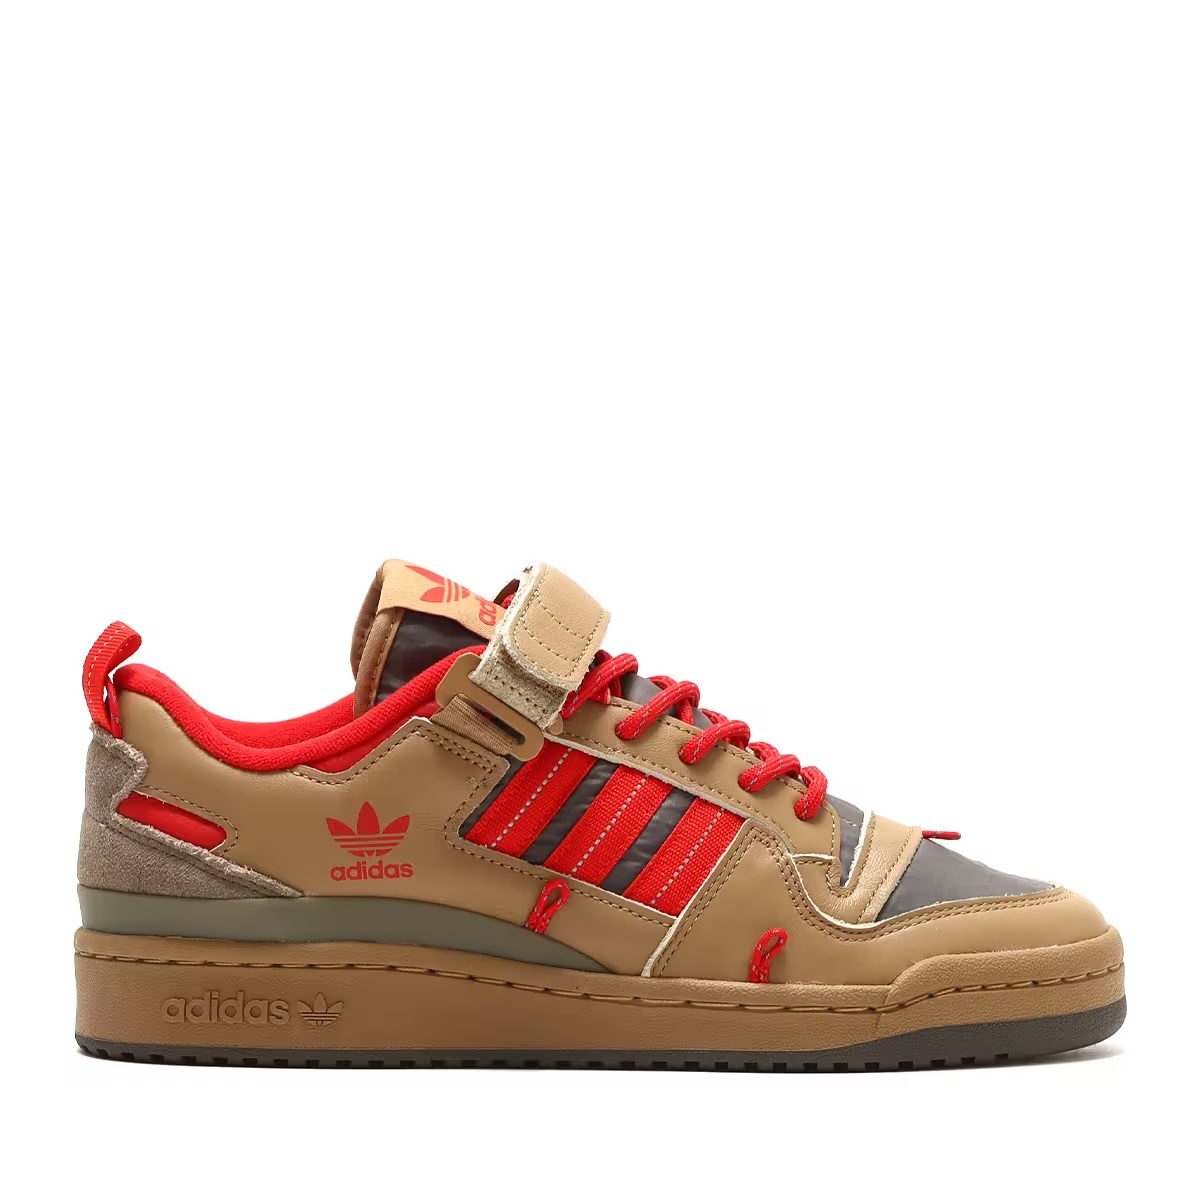  regular price 17600 jpy new goods regular goods Adidas great popularity reissue model Adidas forum 84 camp low red X beige 27. changing cord attaching 